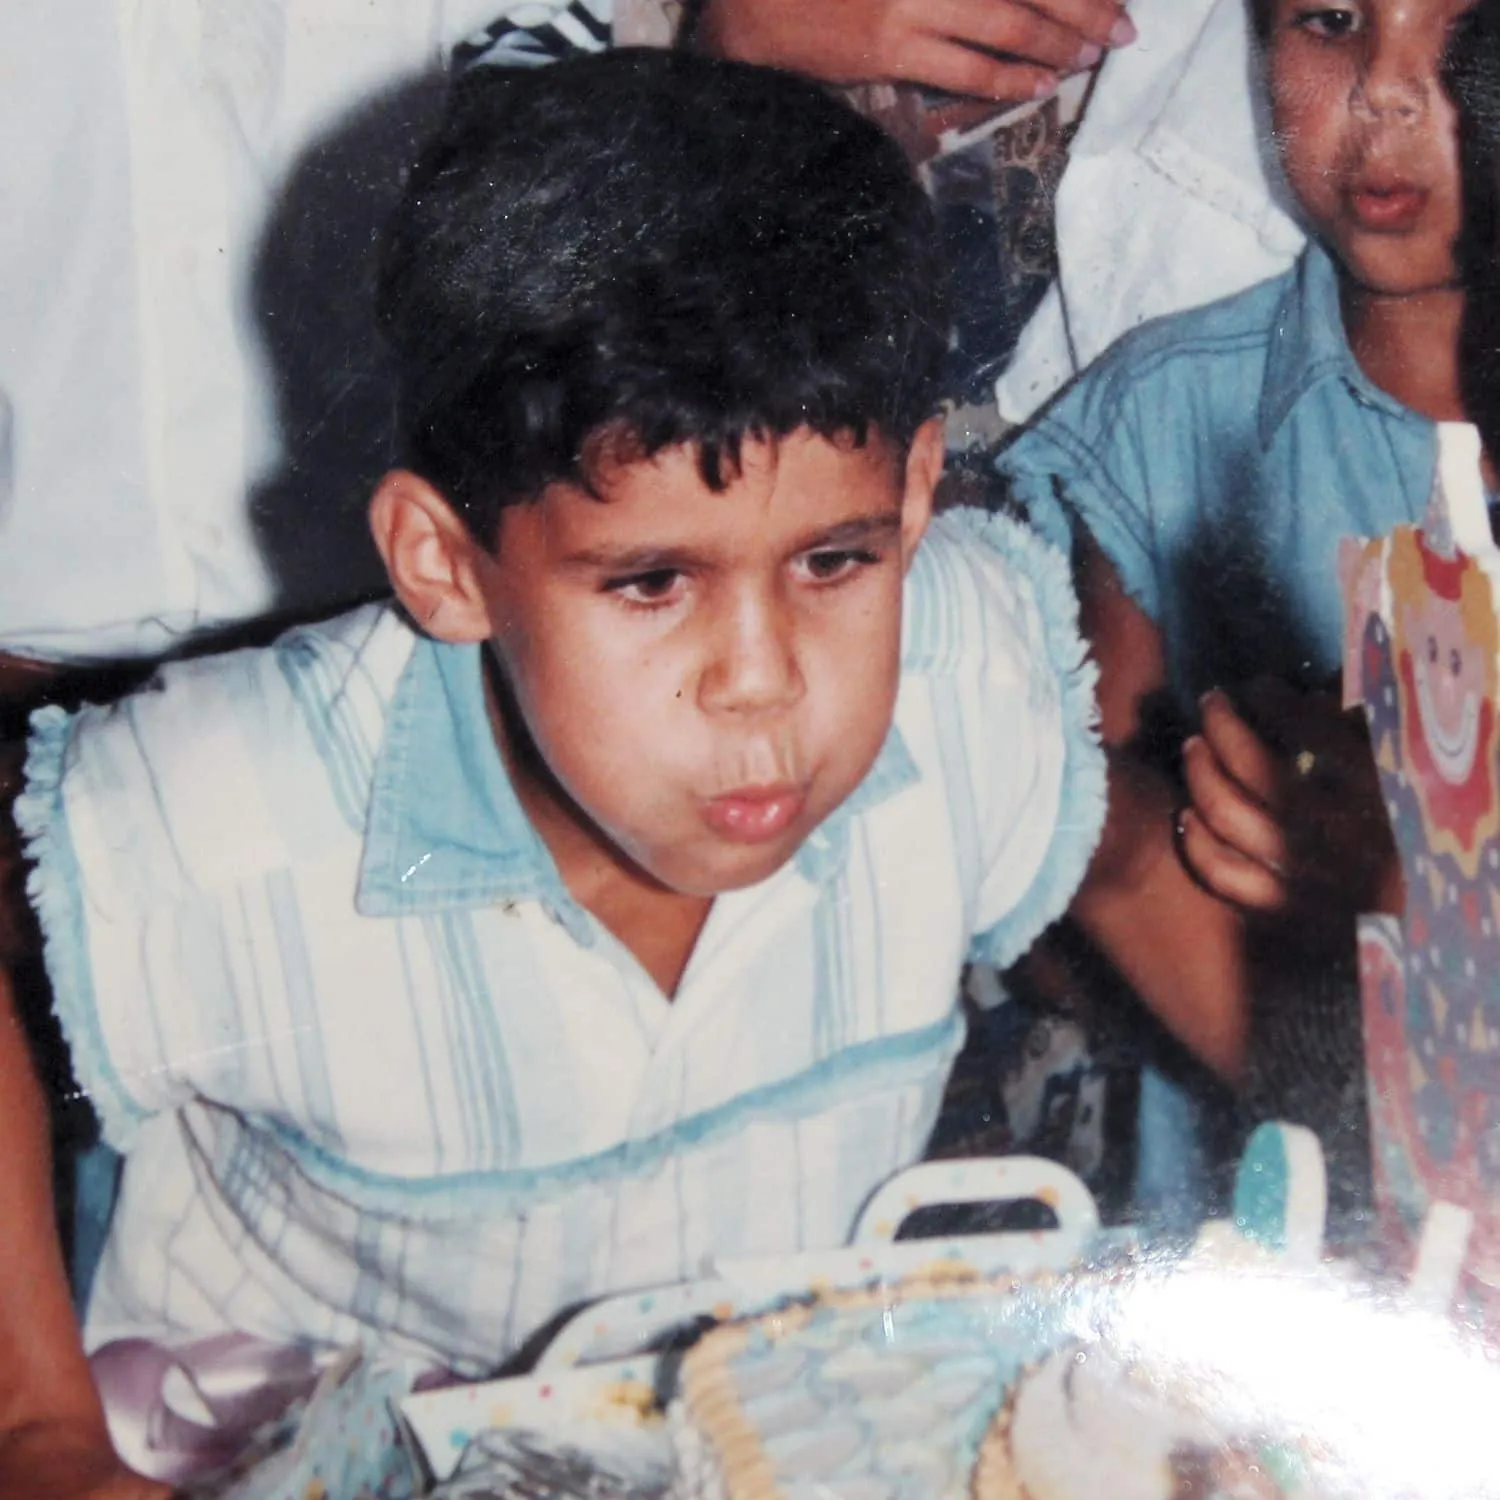 Diego Costa as a child blew off candles on his birthday.